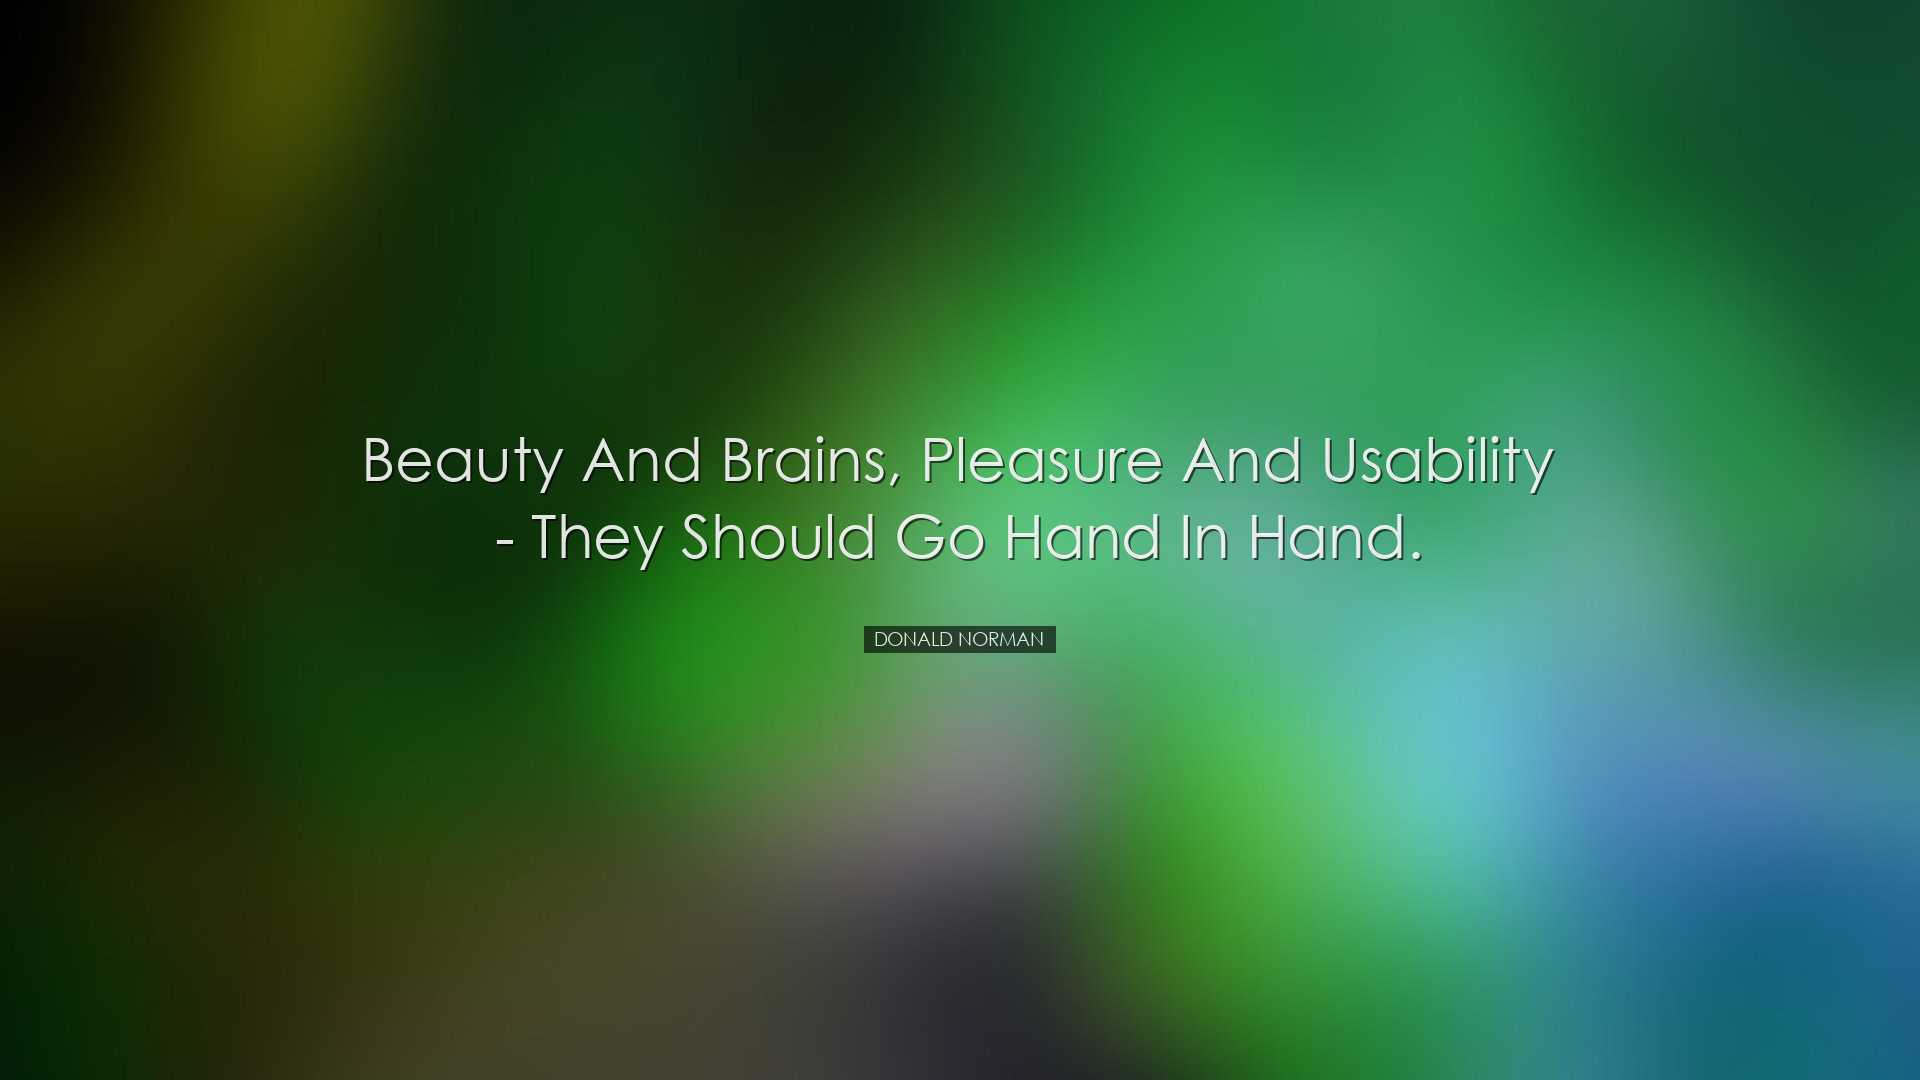 Beauty and brains, pleasure and usability - they should go hand in